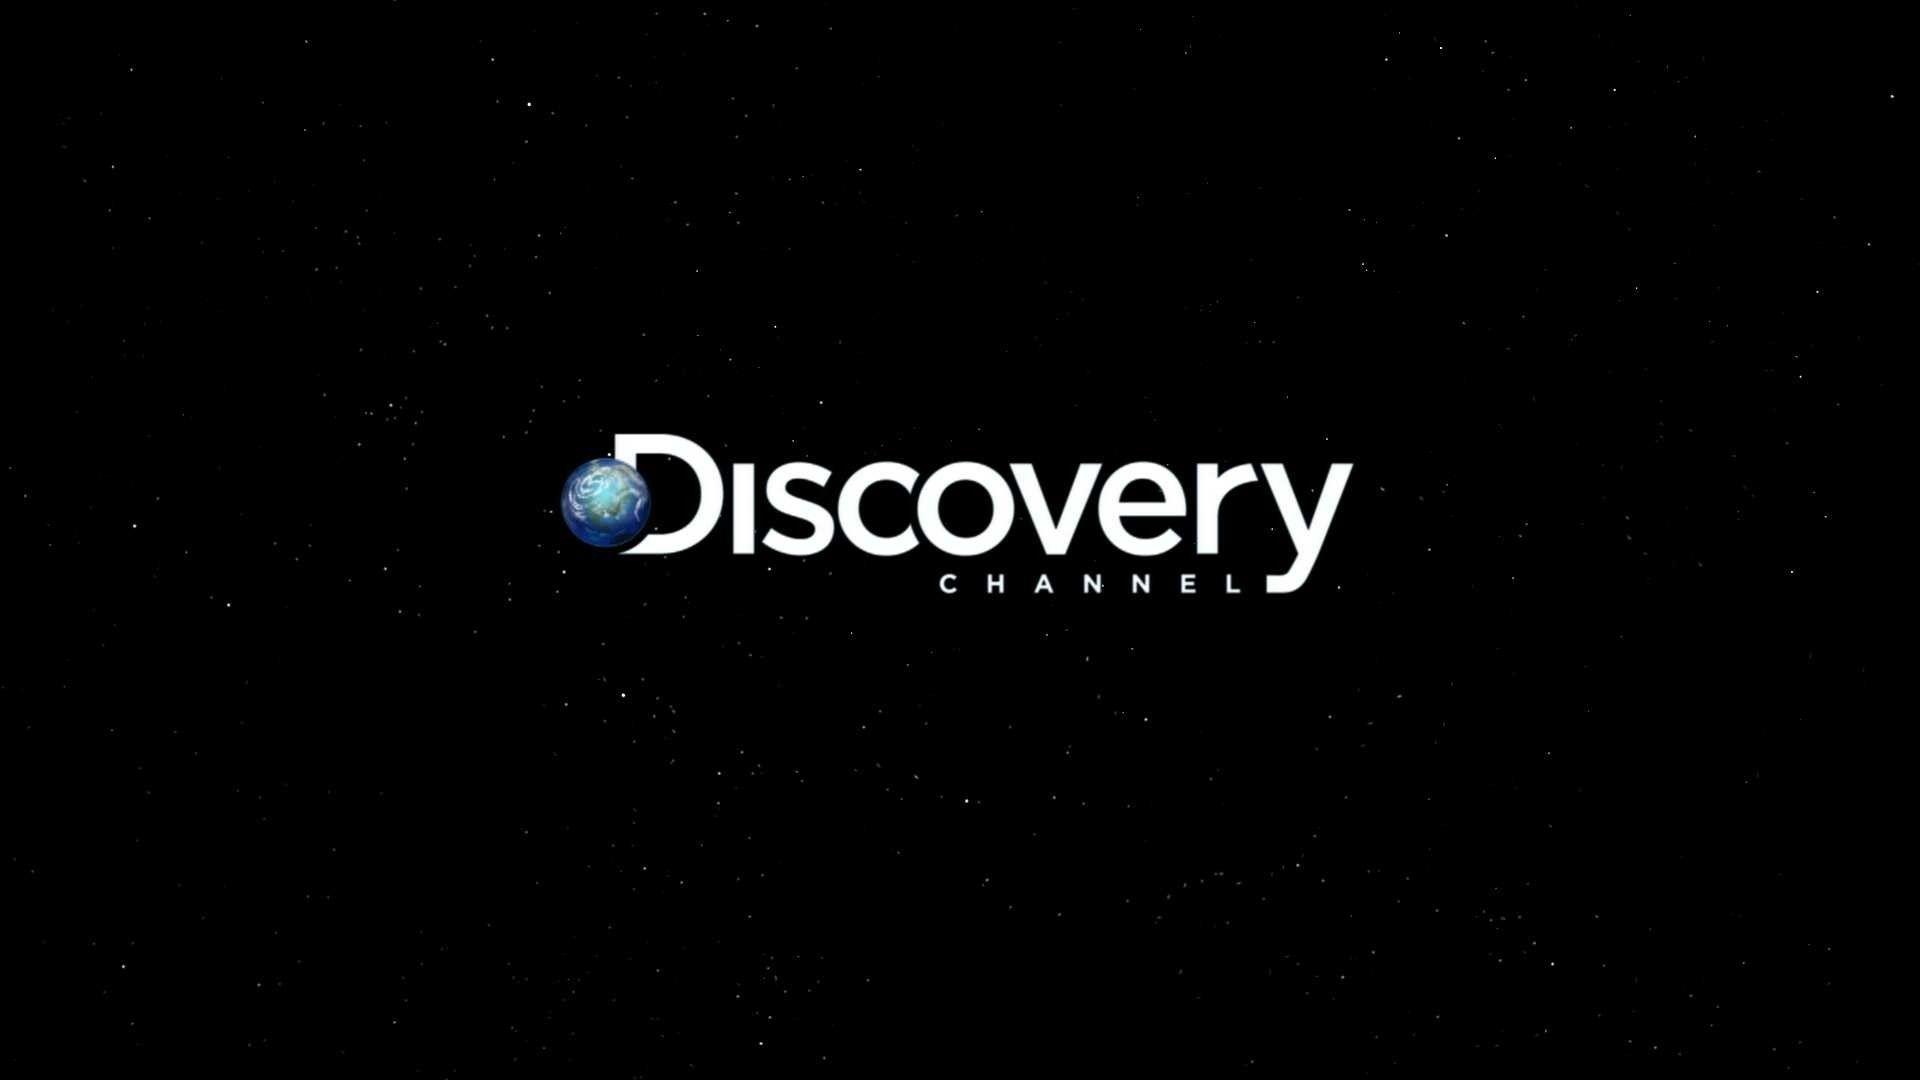 HD Discovery Wallpapers - Wallpaper Cave